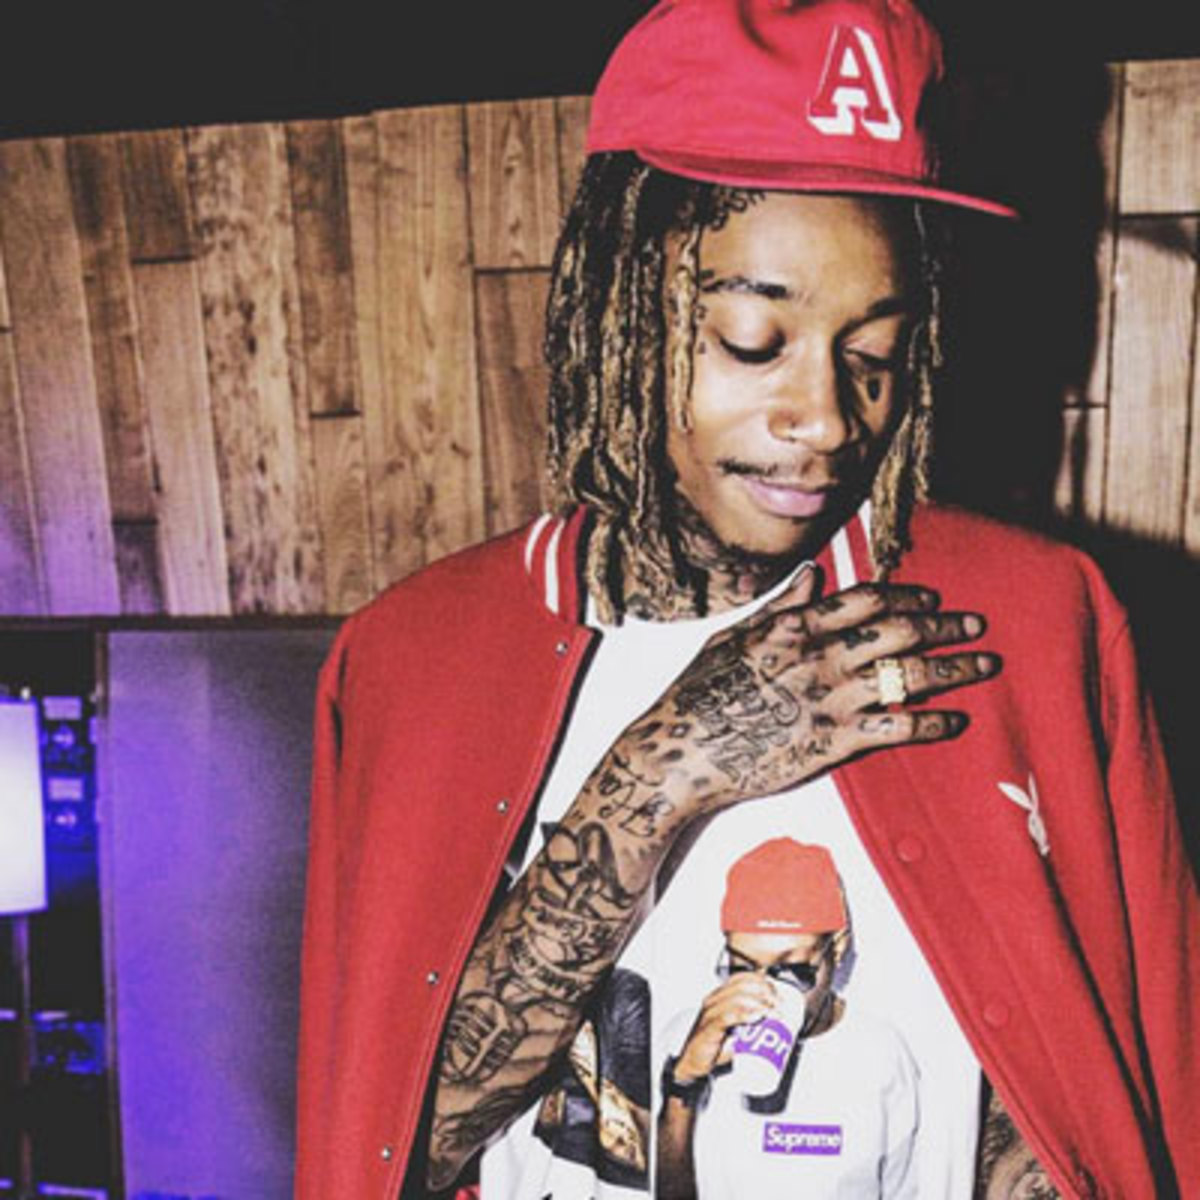 Wiz Khalifa’s “See You Again” First Hip-Hop Video With One Billion Views - DJBooth1200 x 1200